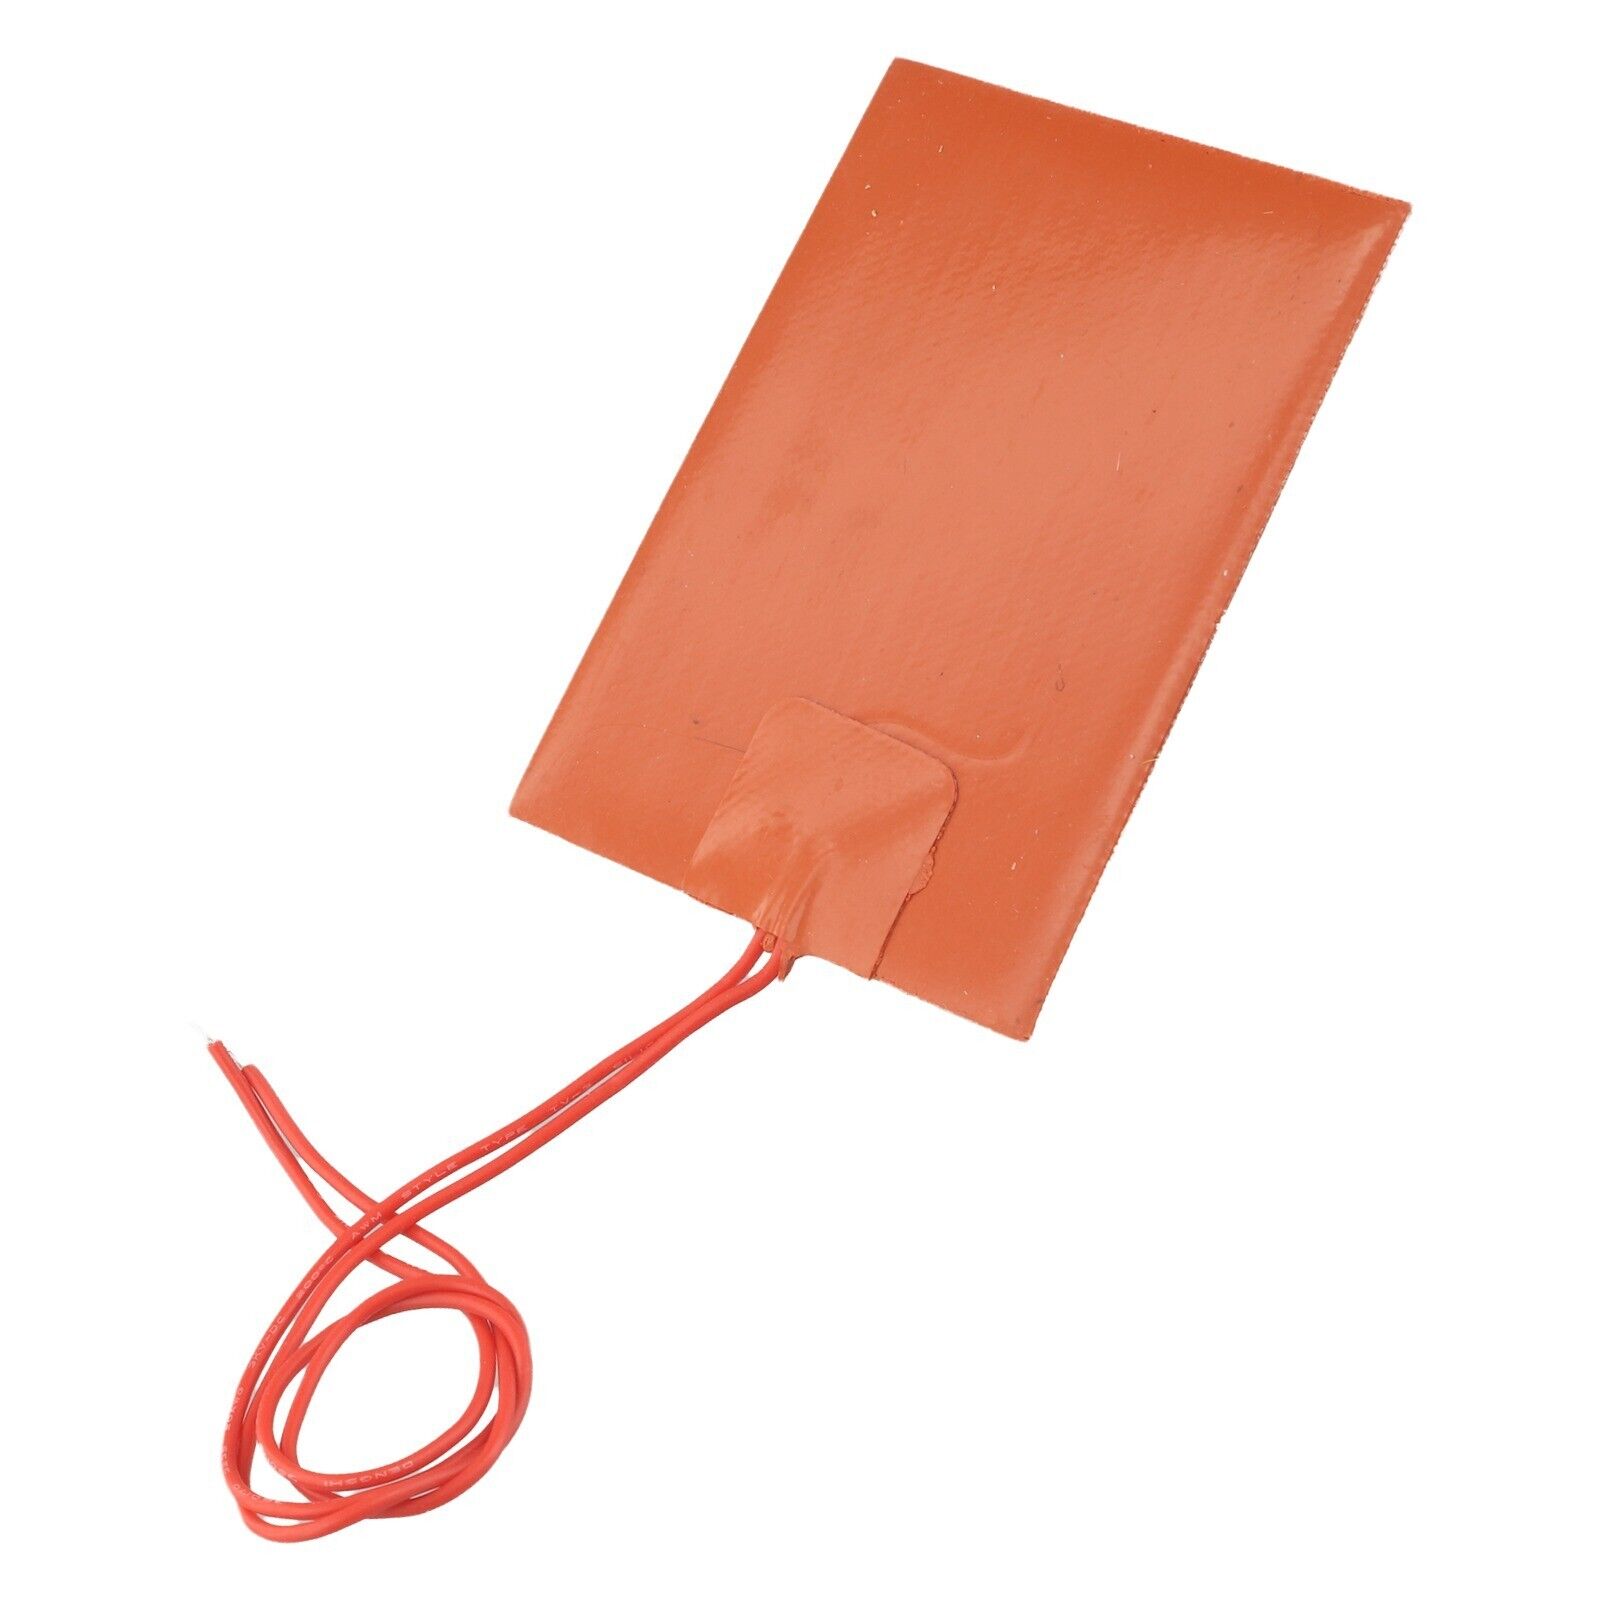 12V DC Silicone Rubber Heating Pad Heater Mat For 3D Printer Heated Waterproof